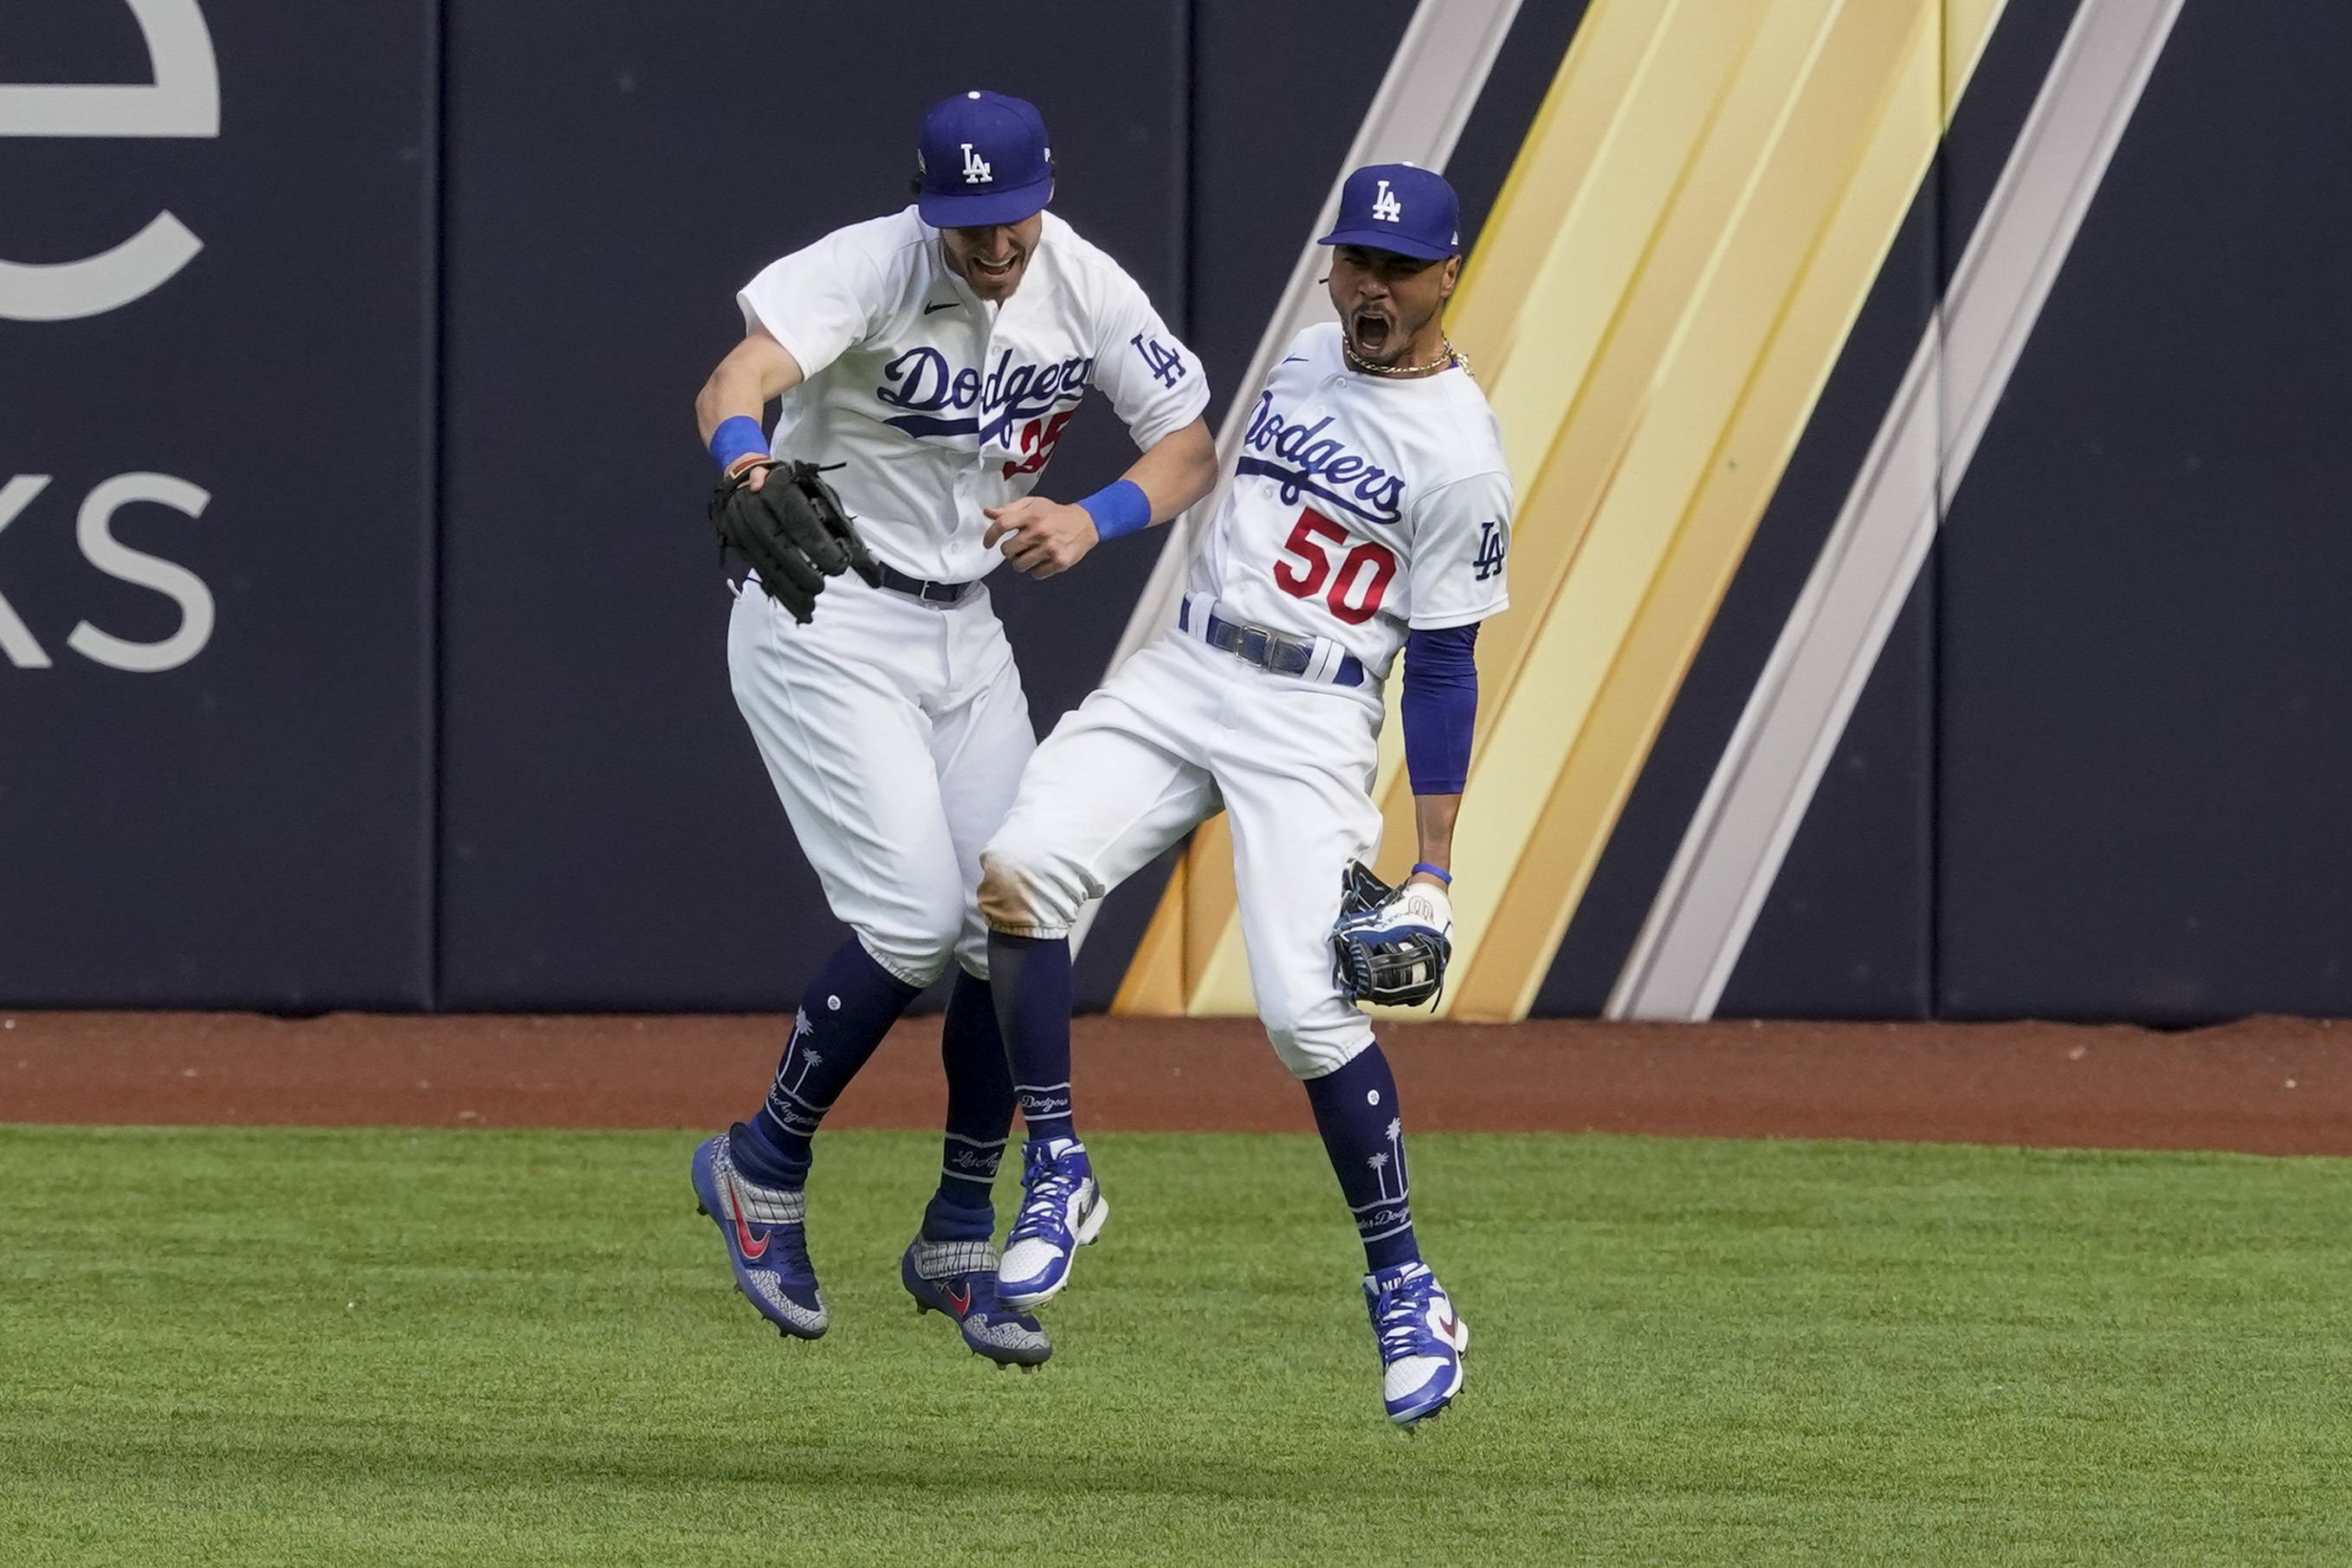 Corey Seager homers again, Los Angeles Dodgers force NLCS Game 7